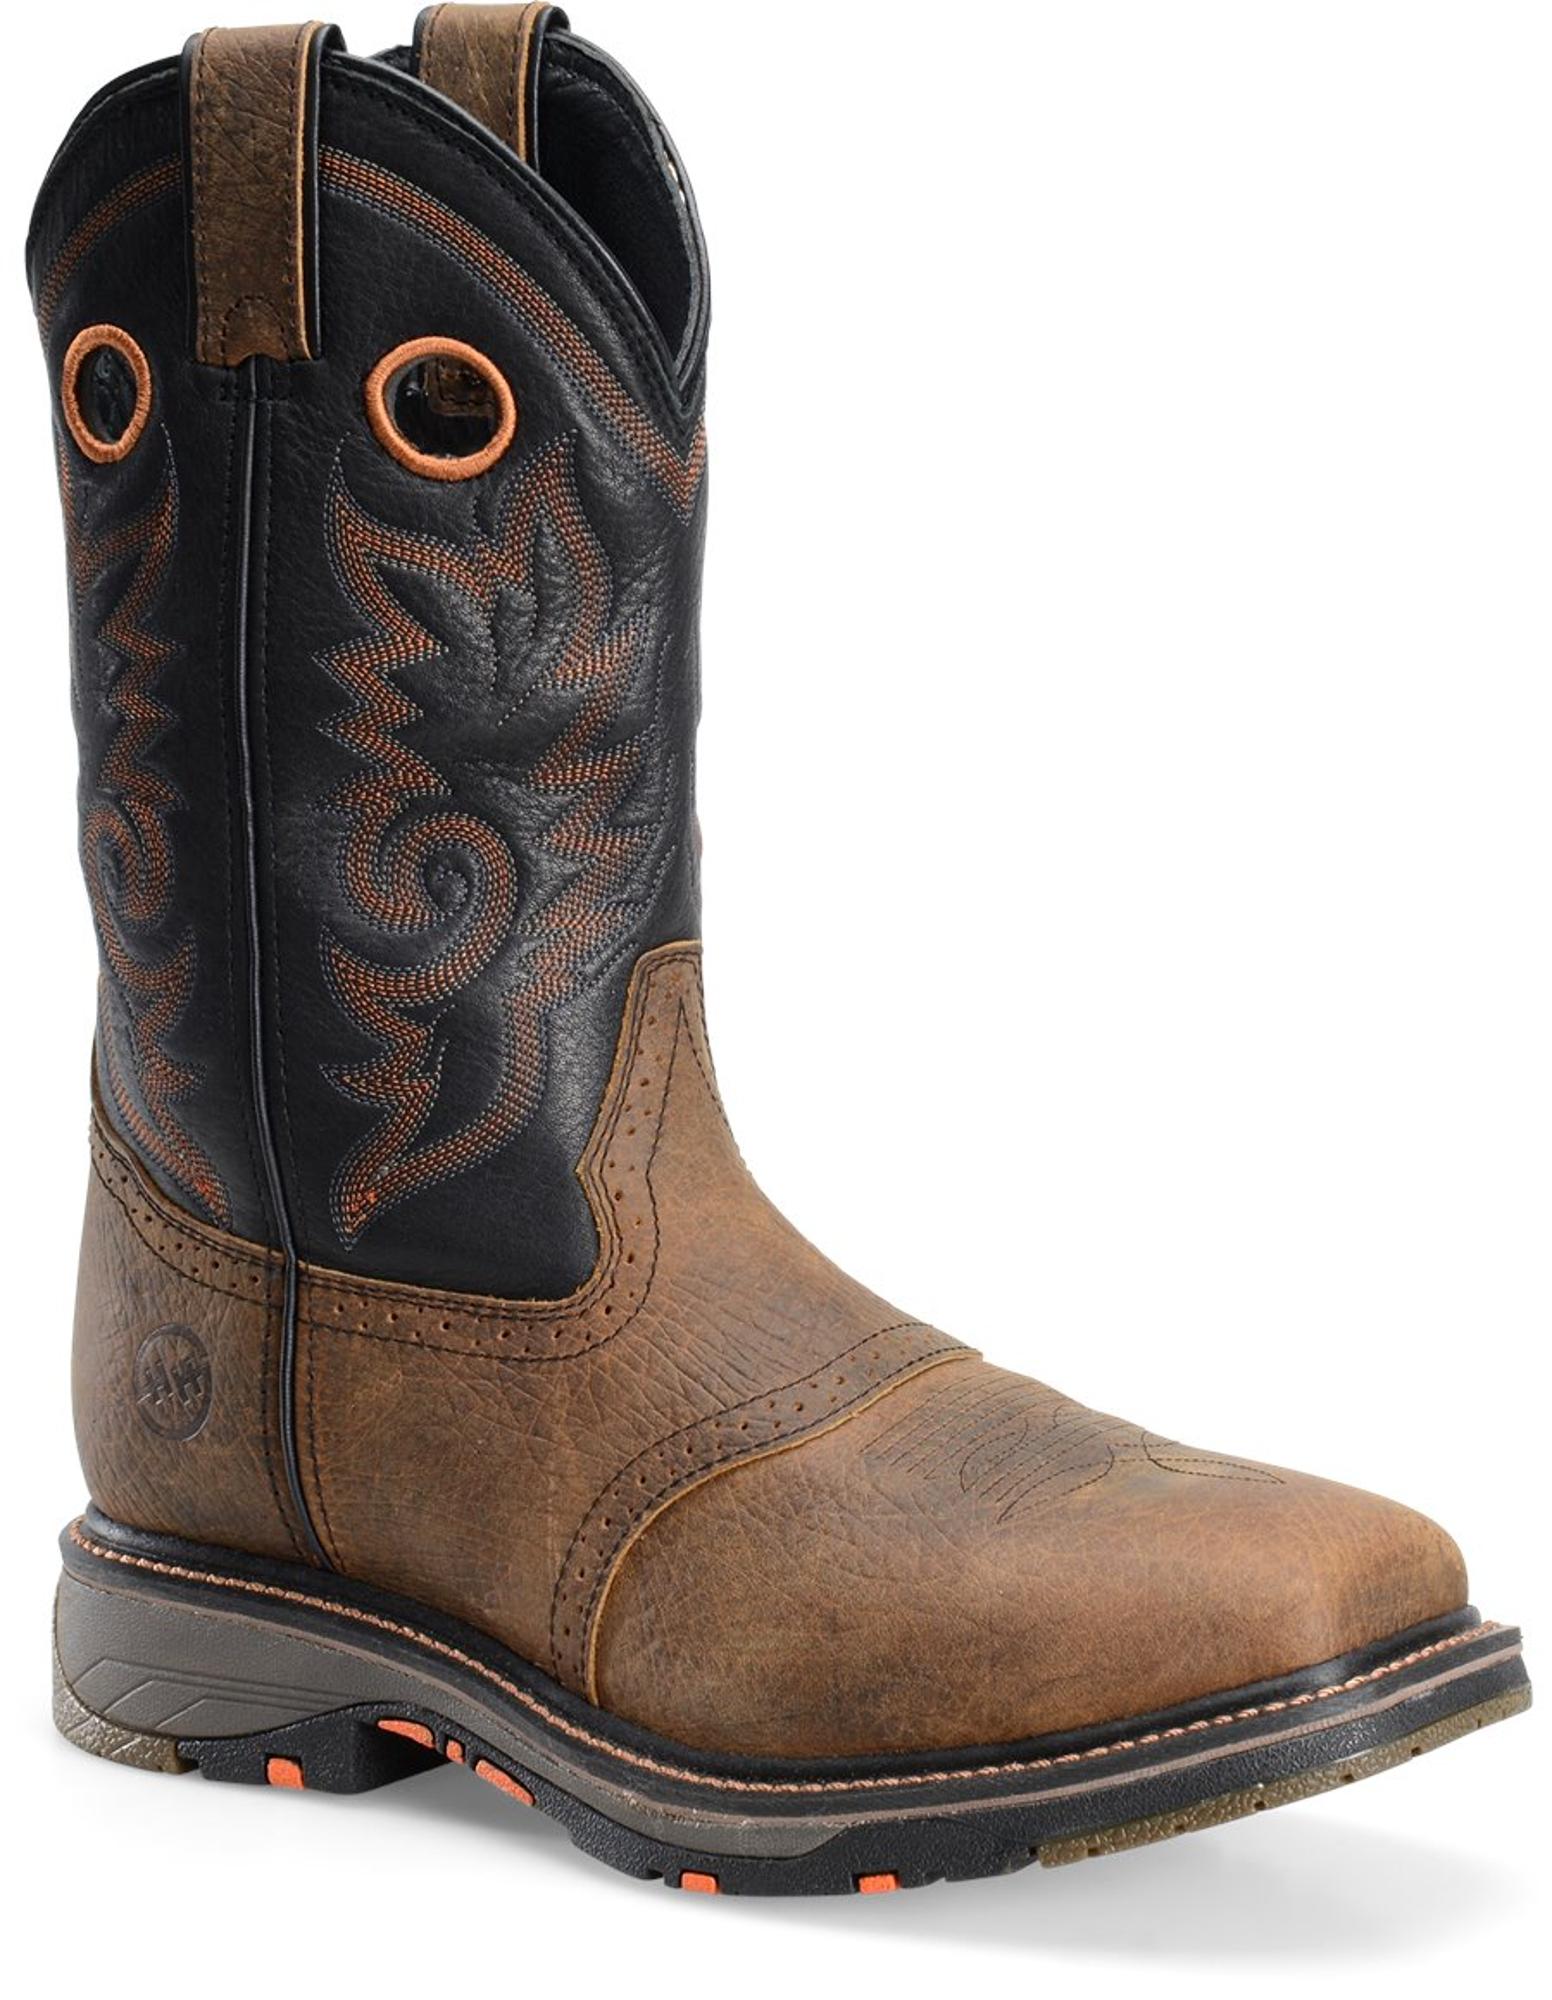 Double- H Isaac Composite Toe Work Boots